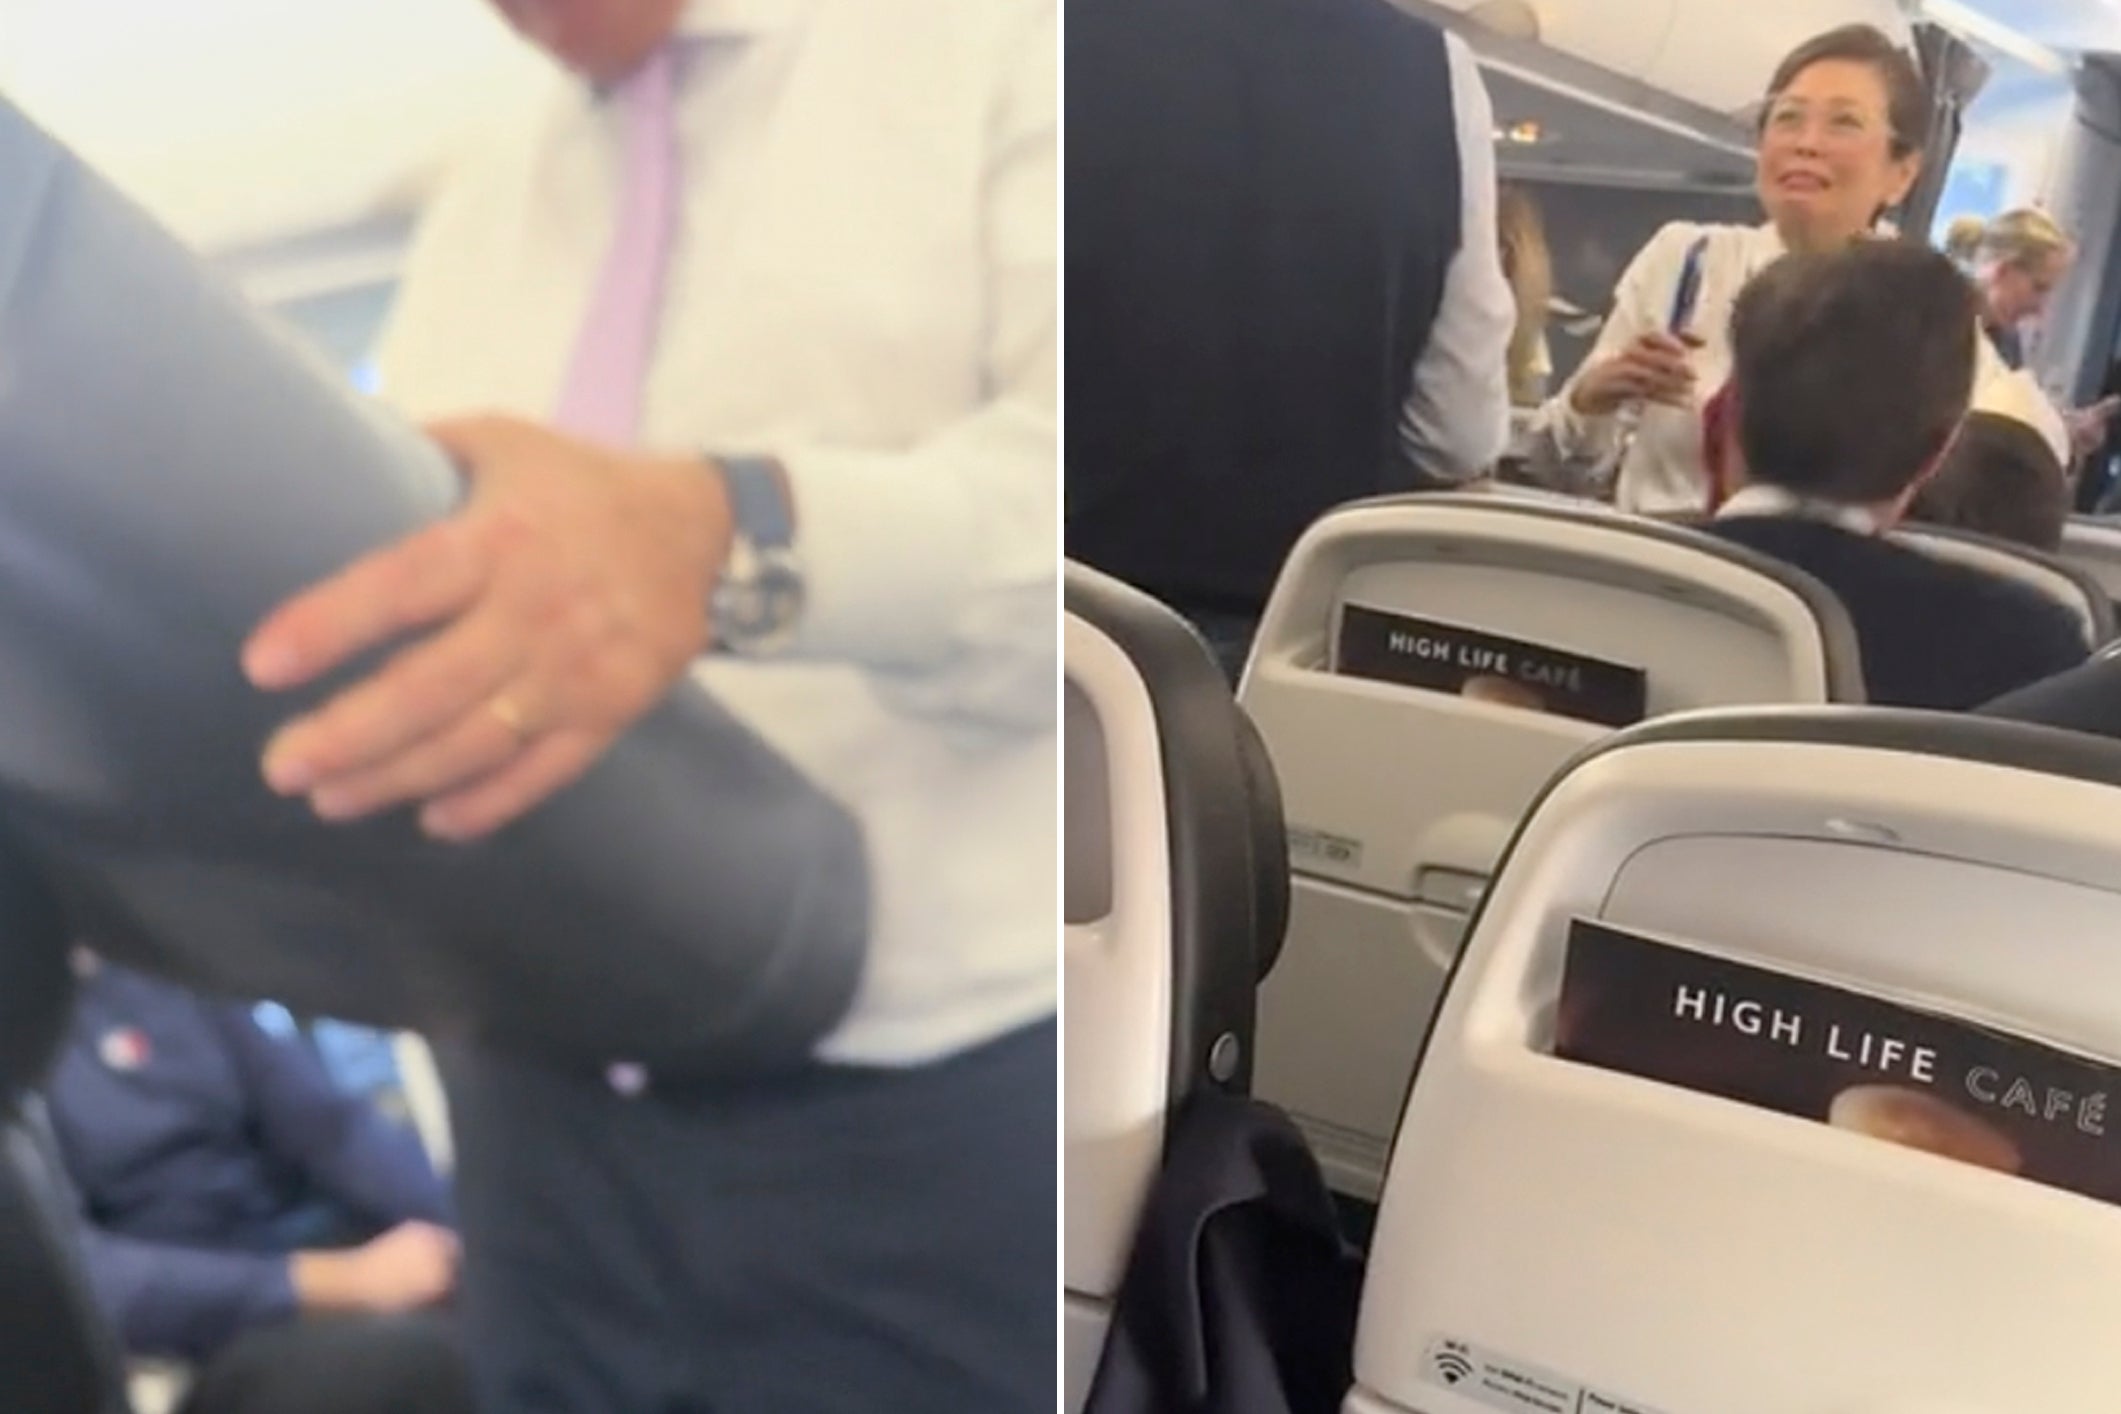 A video showed the scenes on board the delayed on the British Airways flight